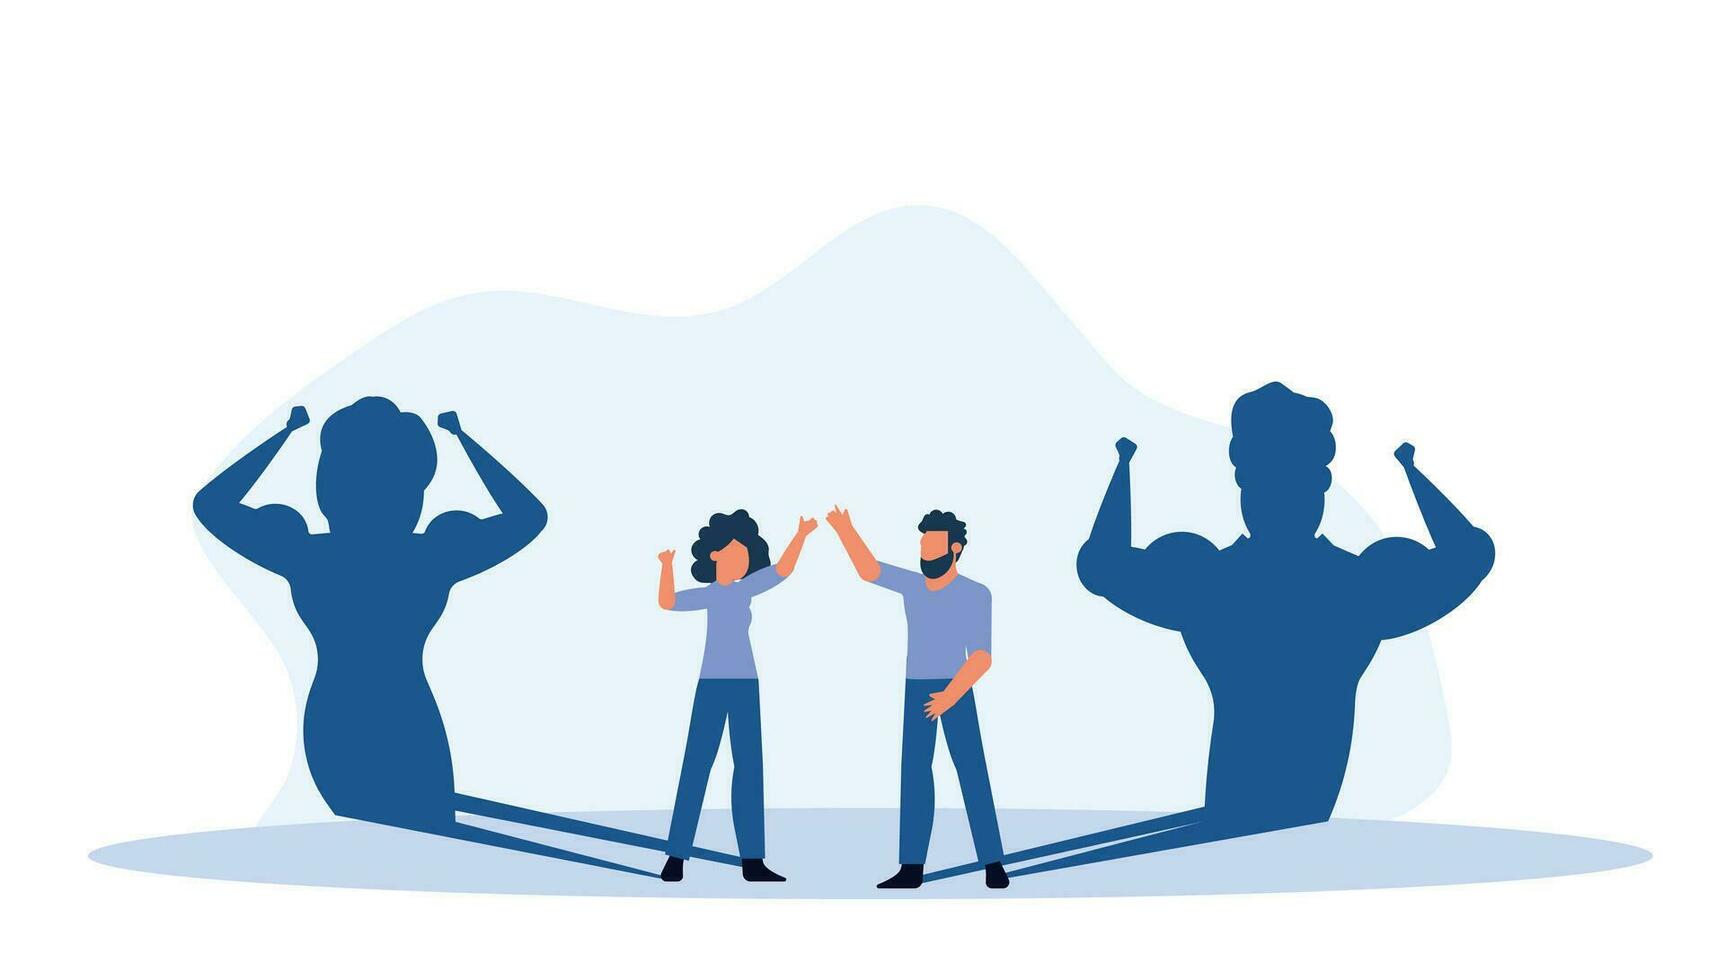 Vector illustration of a flat character representing a young woman and a businessman working together in a business team, symbolizing teamwork and success. Group individuals, including man and woman